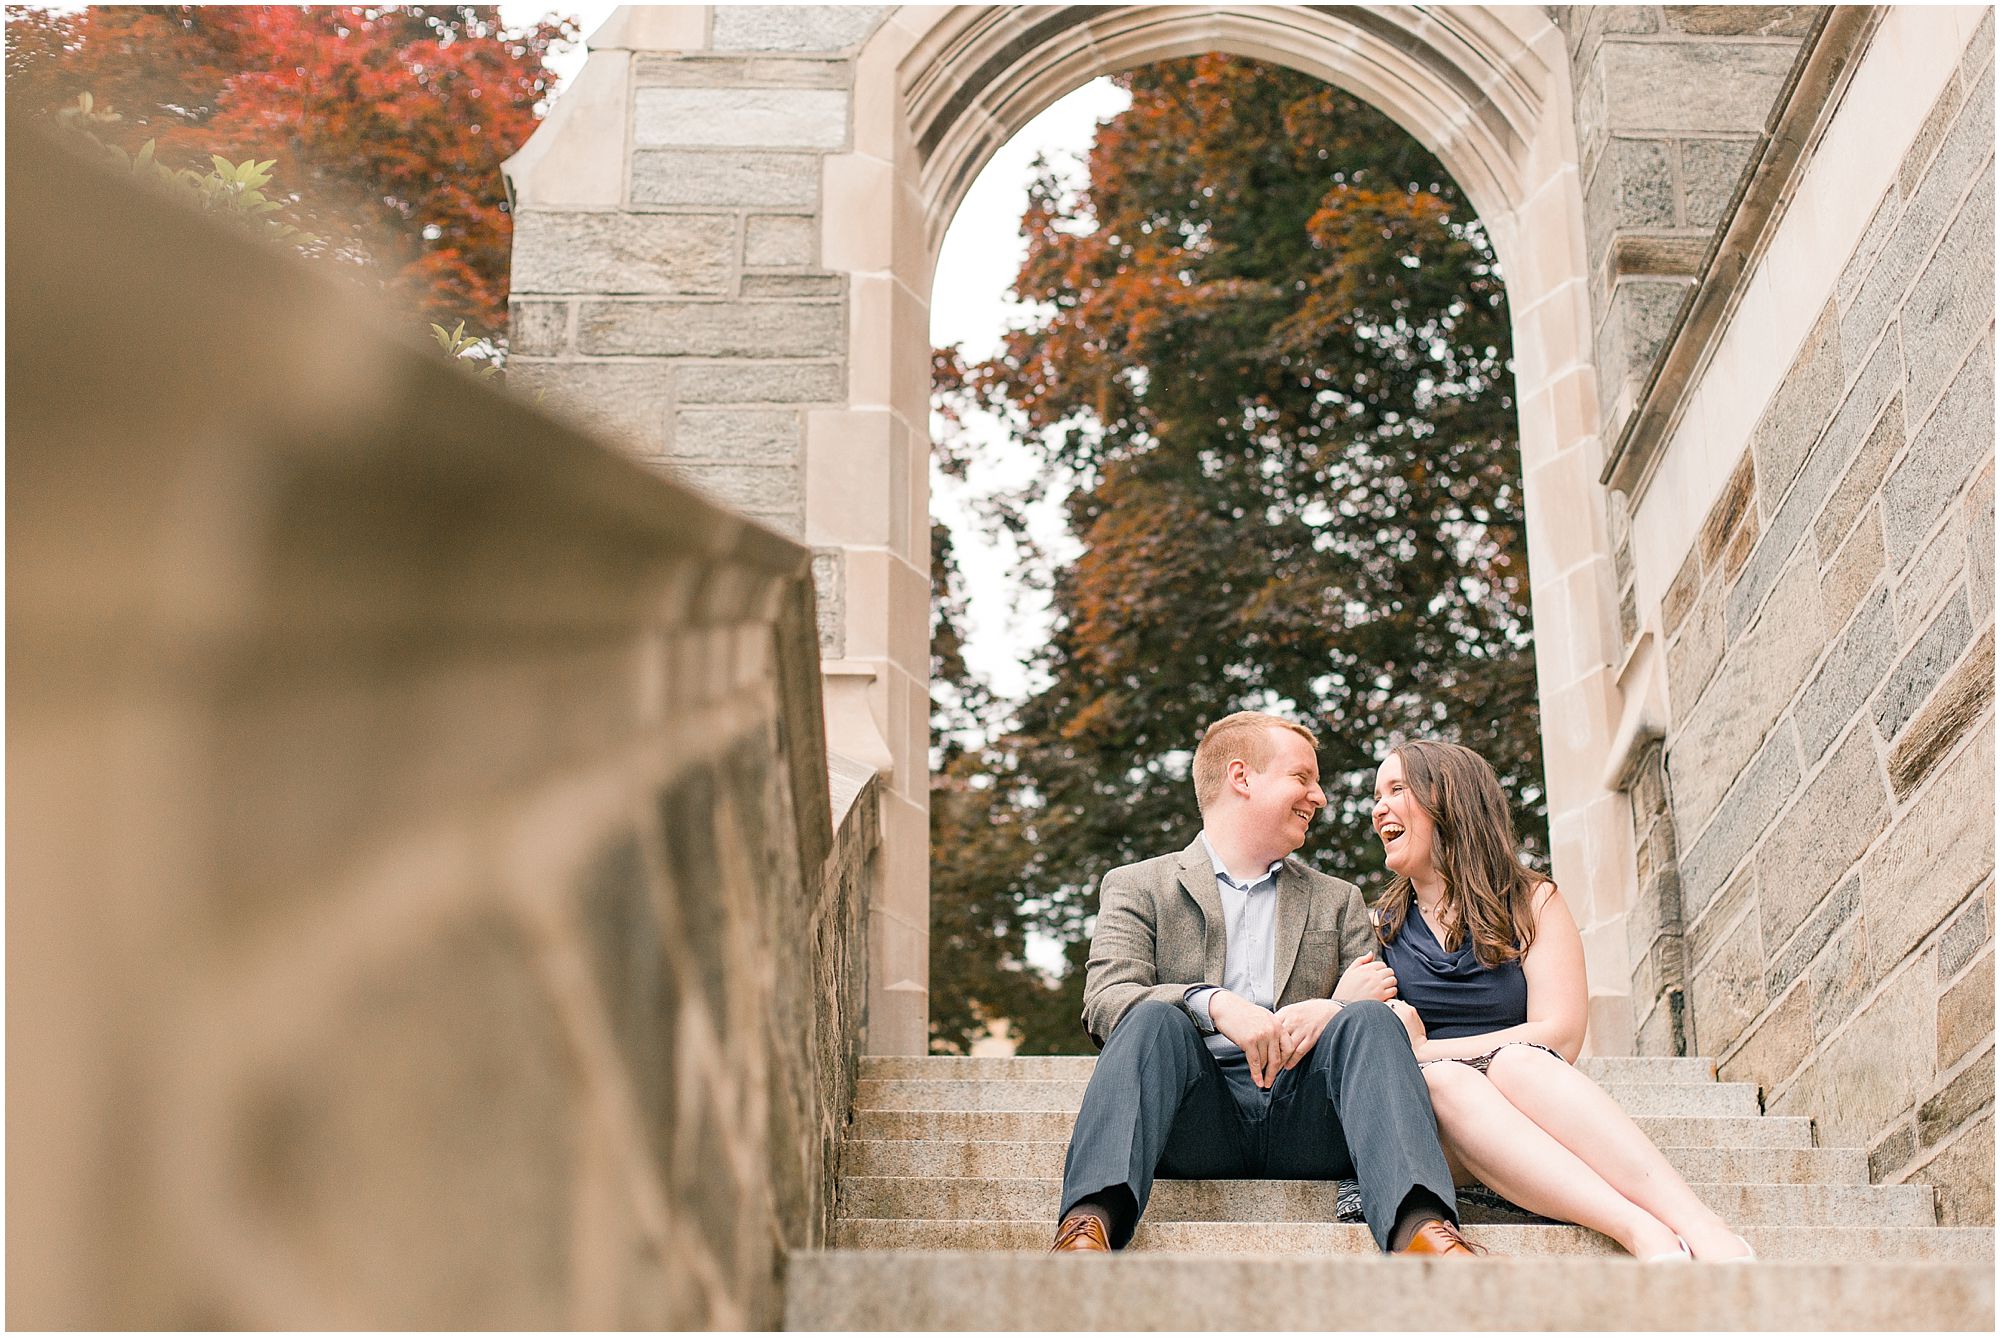 A Classic Spring Engagement in West Chester University, PA